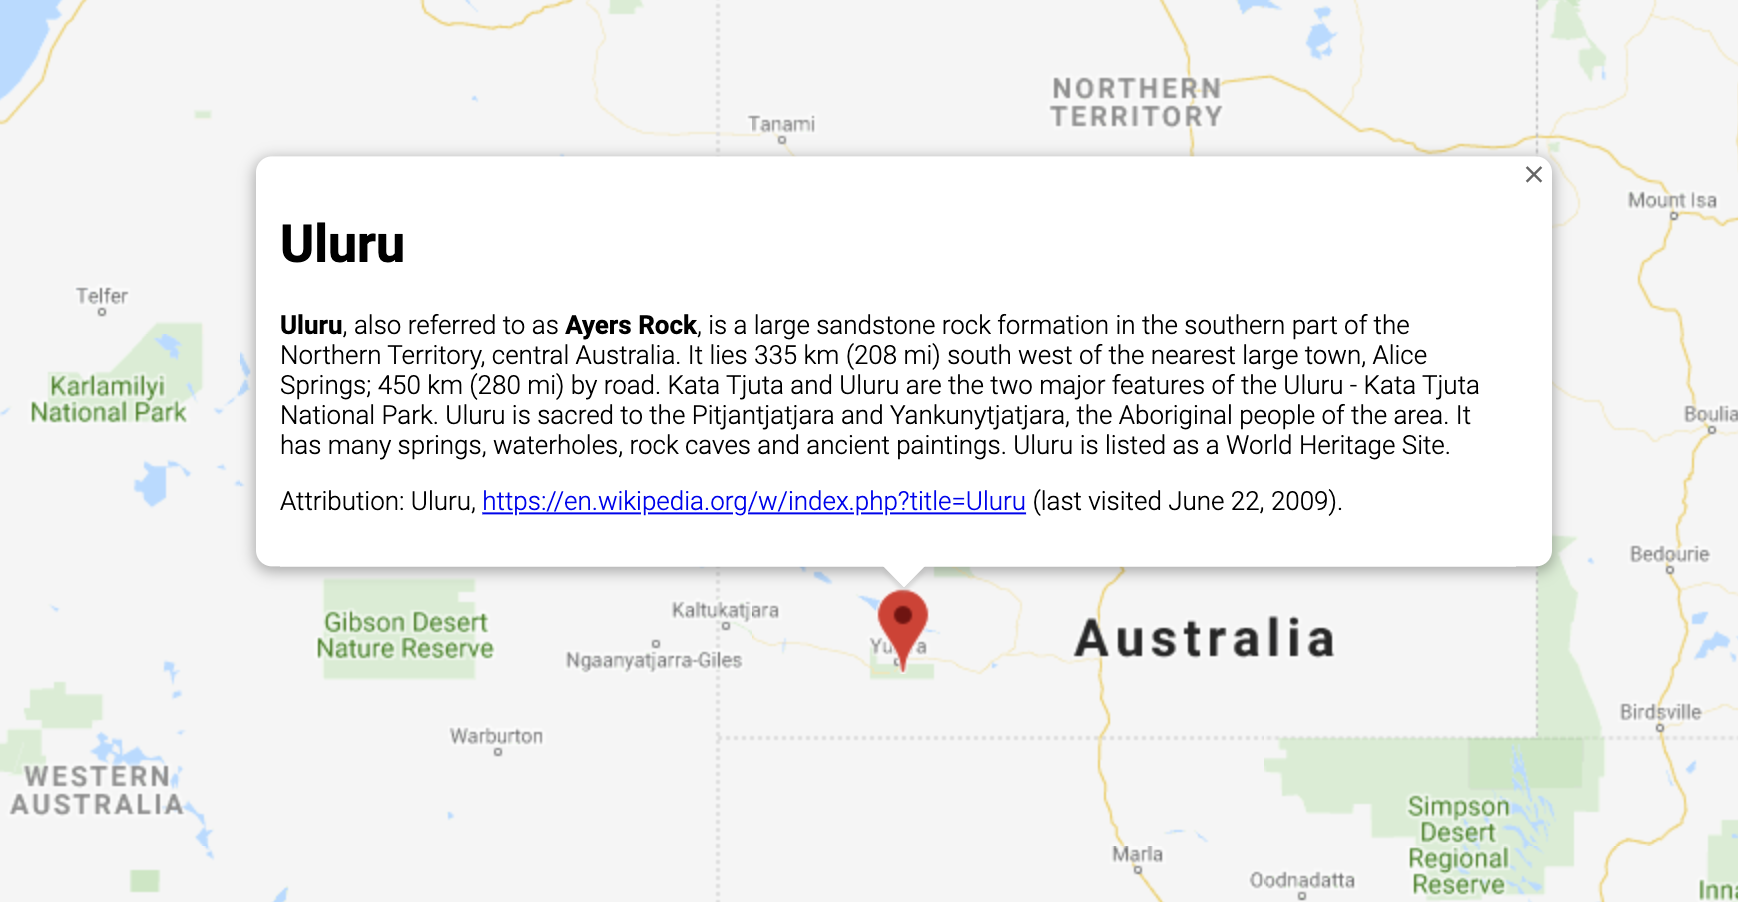 An InfoWindow displaying information about a location in Australia.